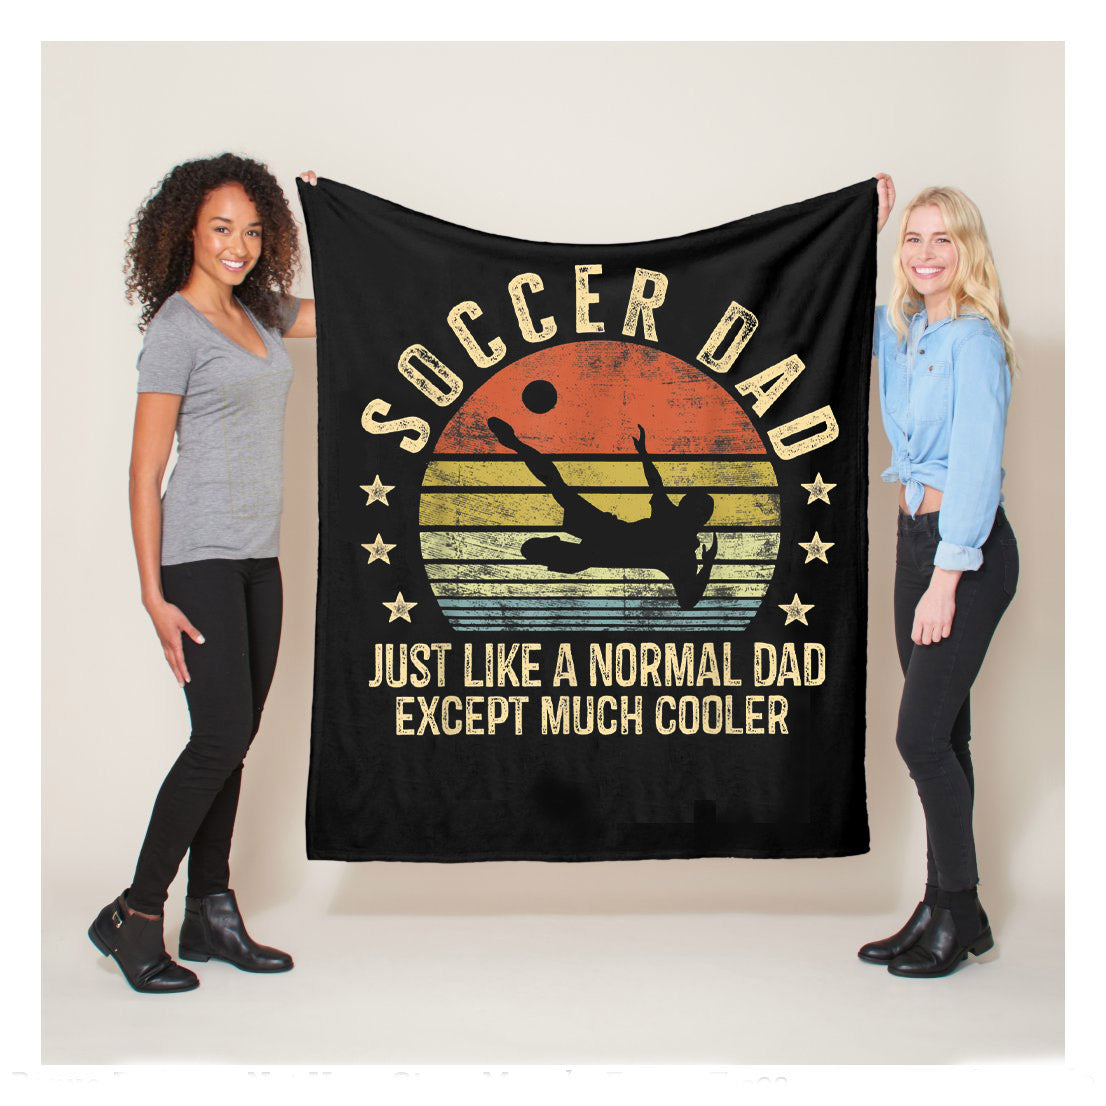 Soccer Dad Just Like Normal Dad Soccer Dad Sherpa Blanket,  Soccer Blankets, Soccer Gifts, Happy Fathers Day Gift Ideas For Dad